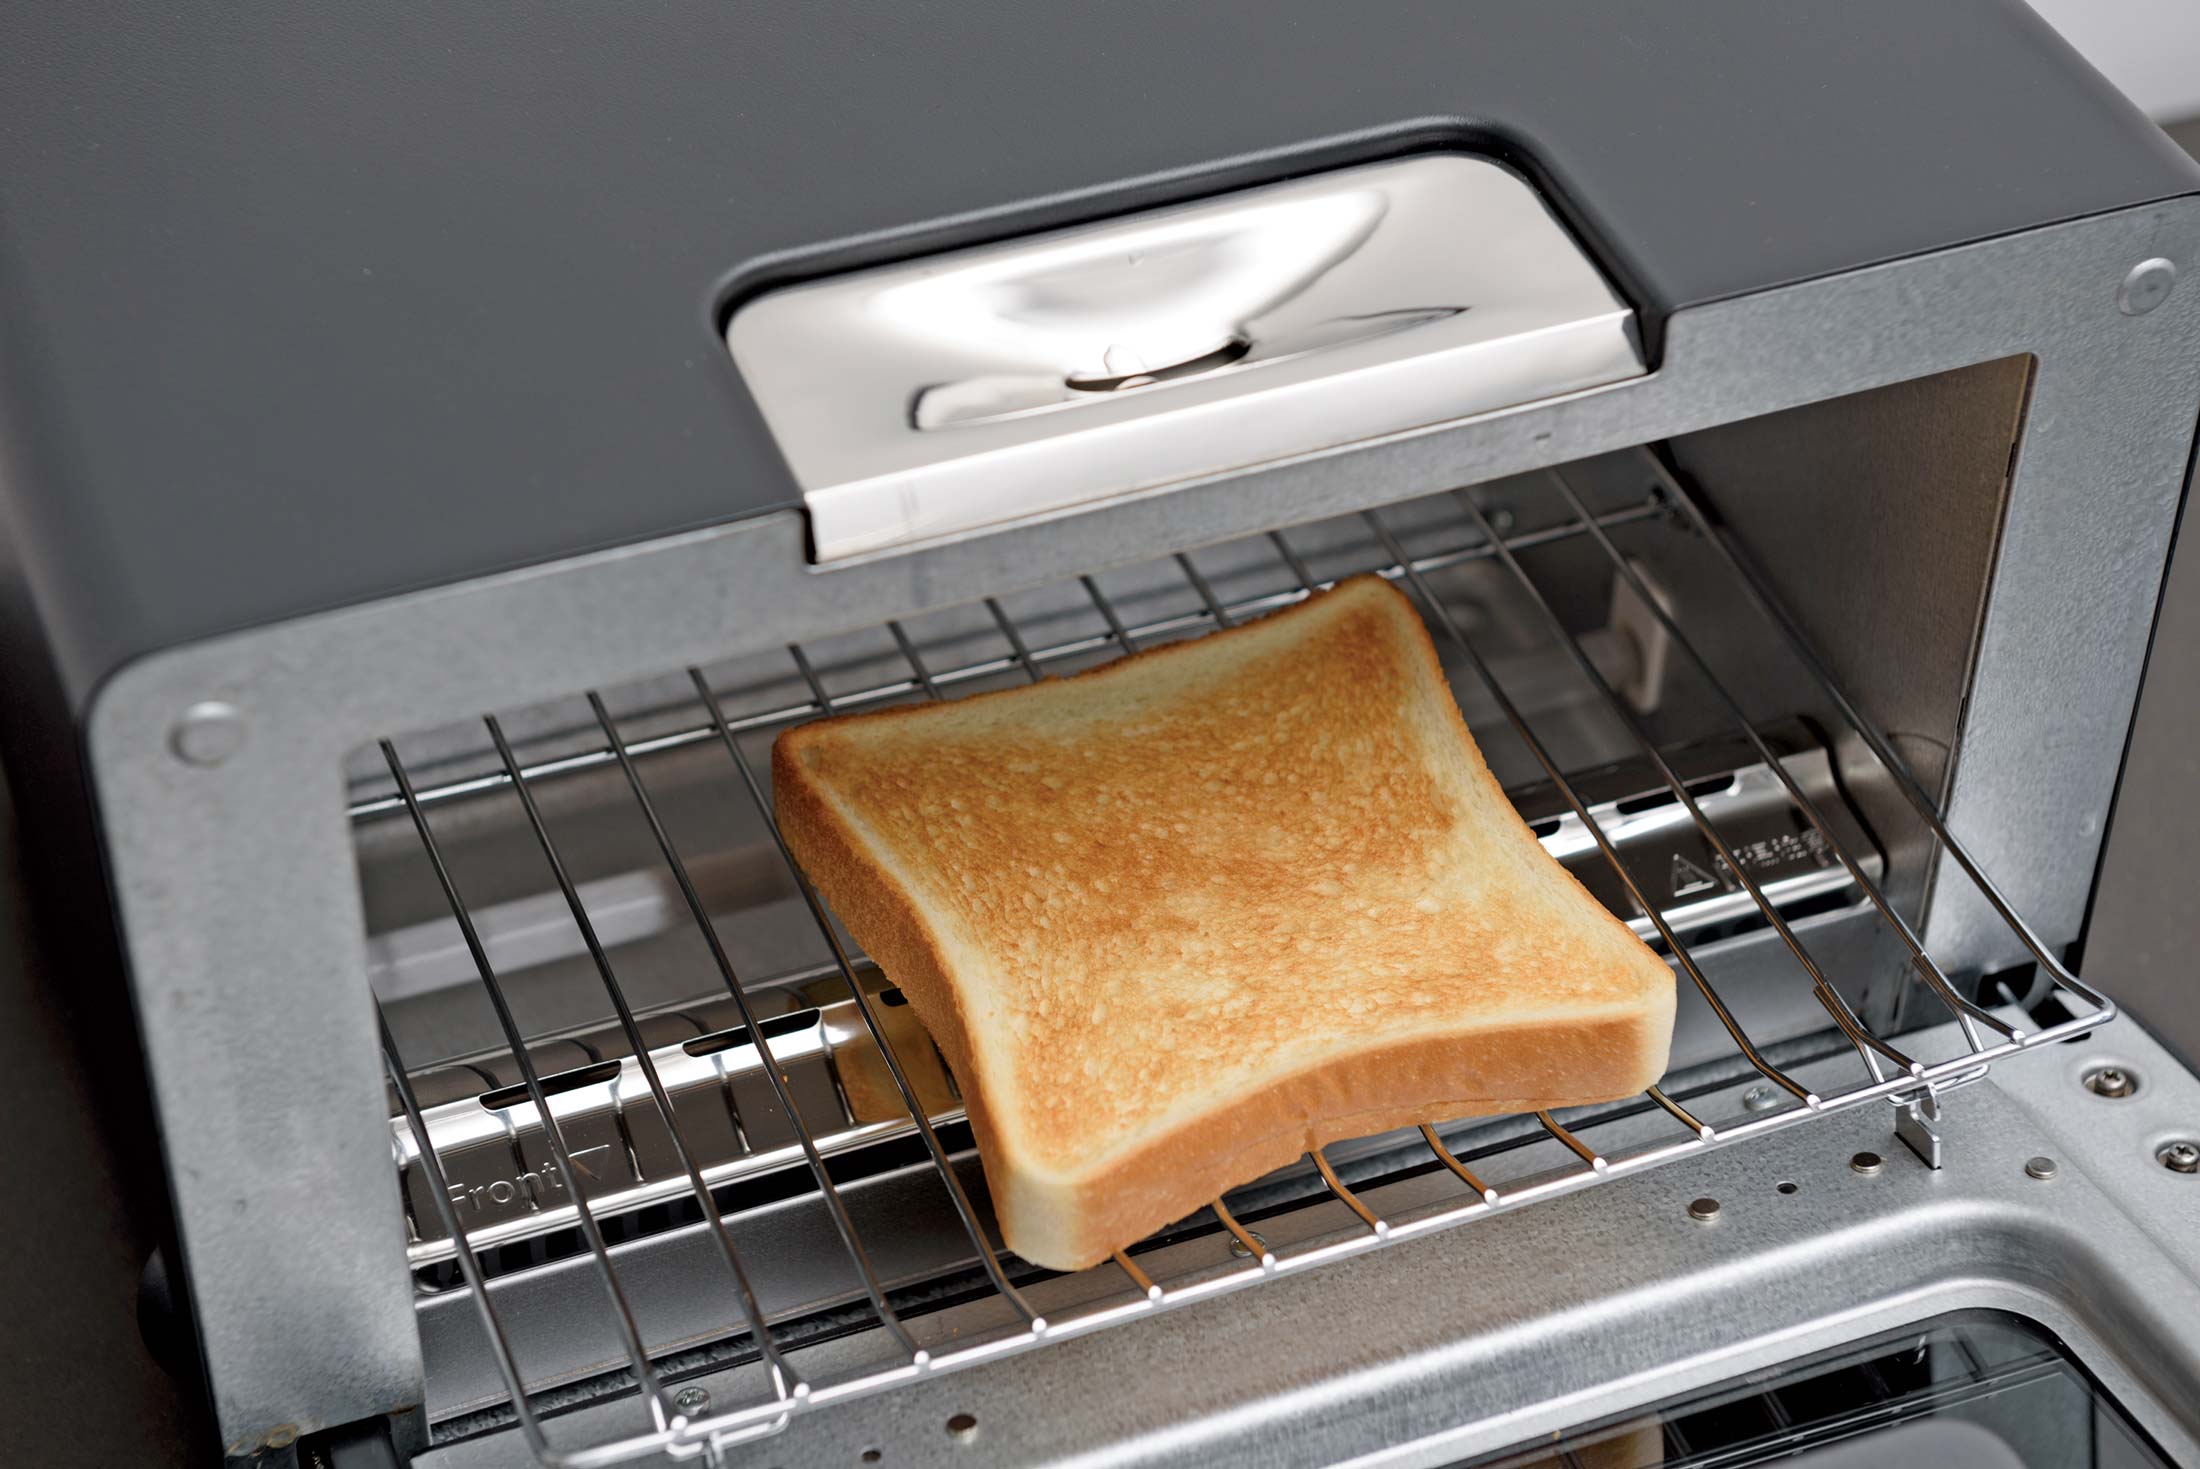 Next Step for $300 Japanese Toaster Maker Balmuda May Be Foray Into Wind  Power - Bloomberg